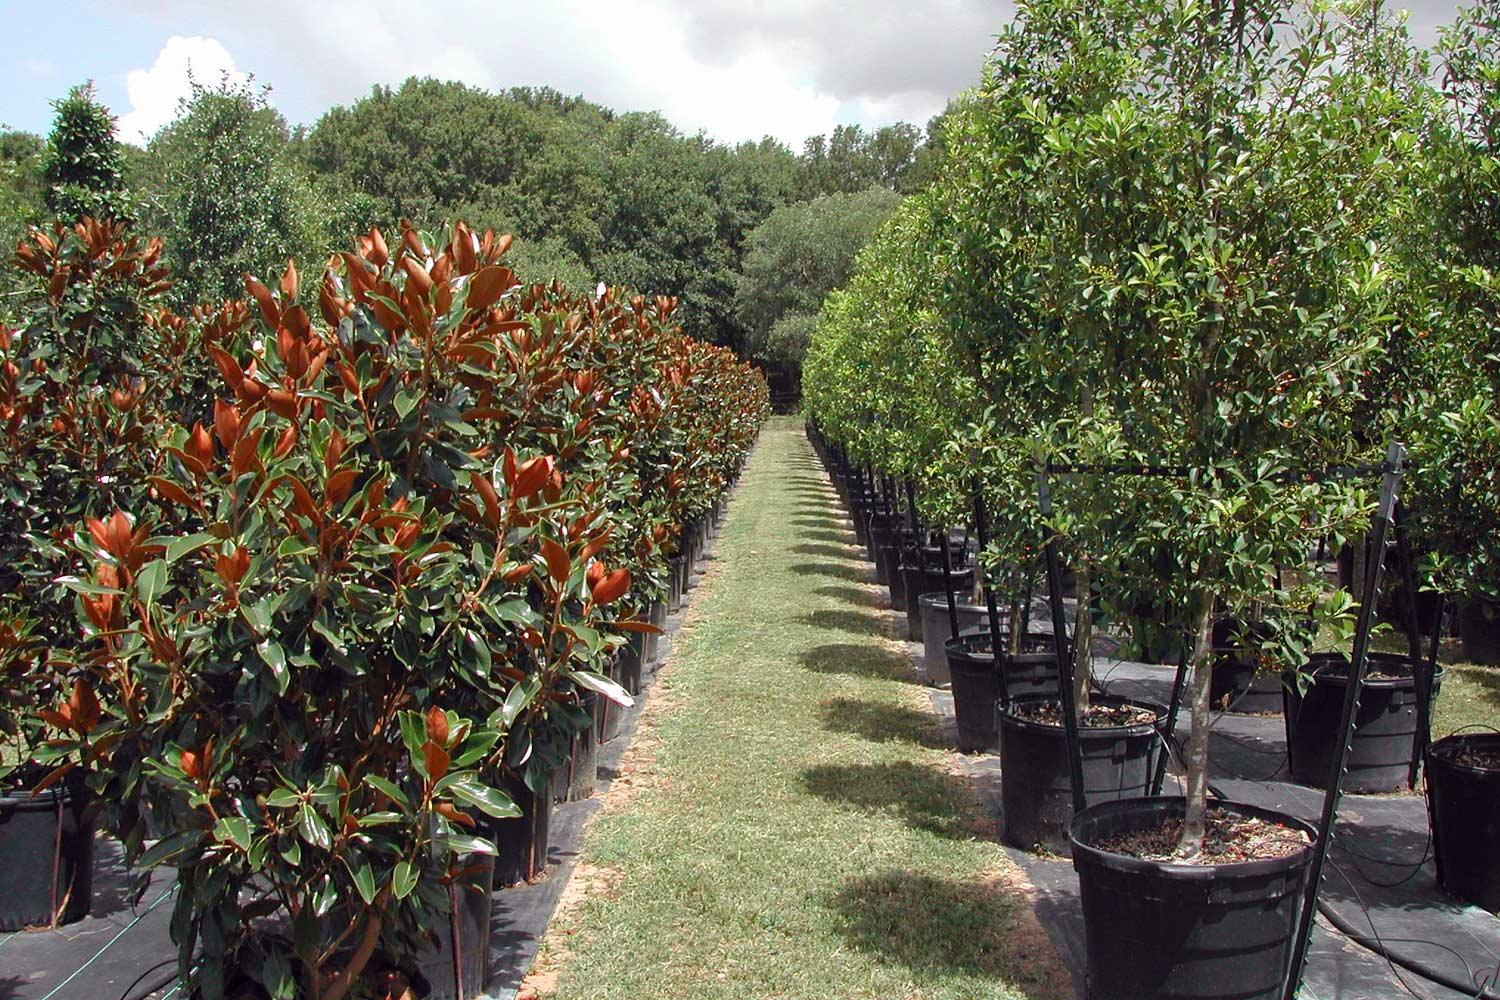 Trees at a nursery ready for transplanting.